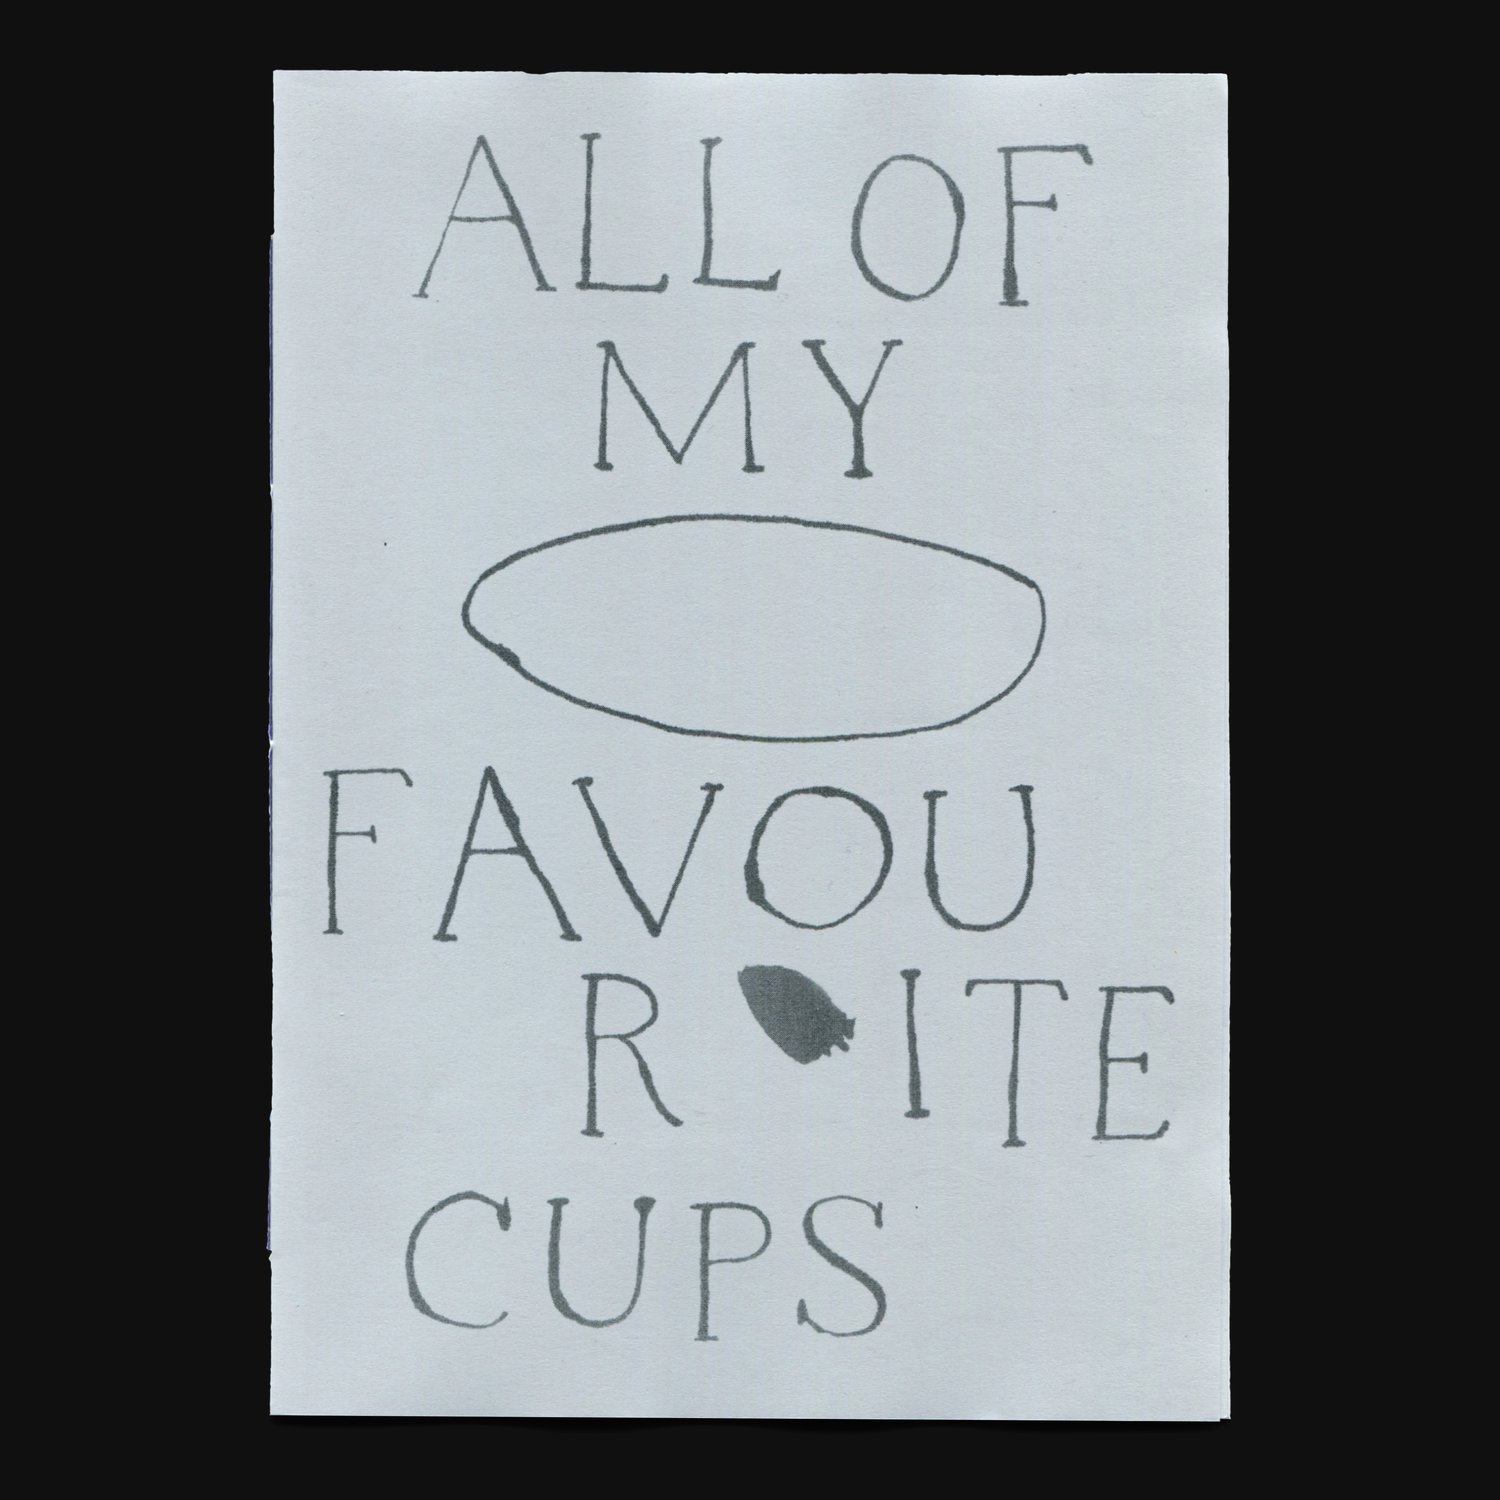 All of my favourite cups